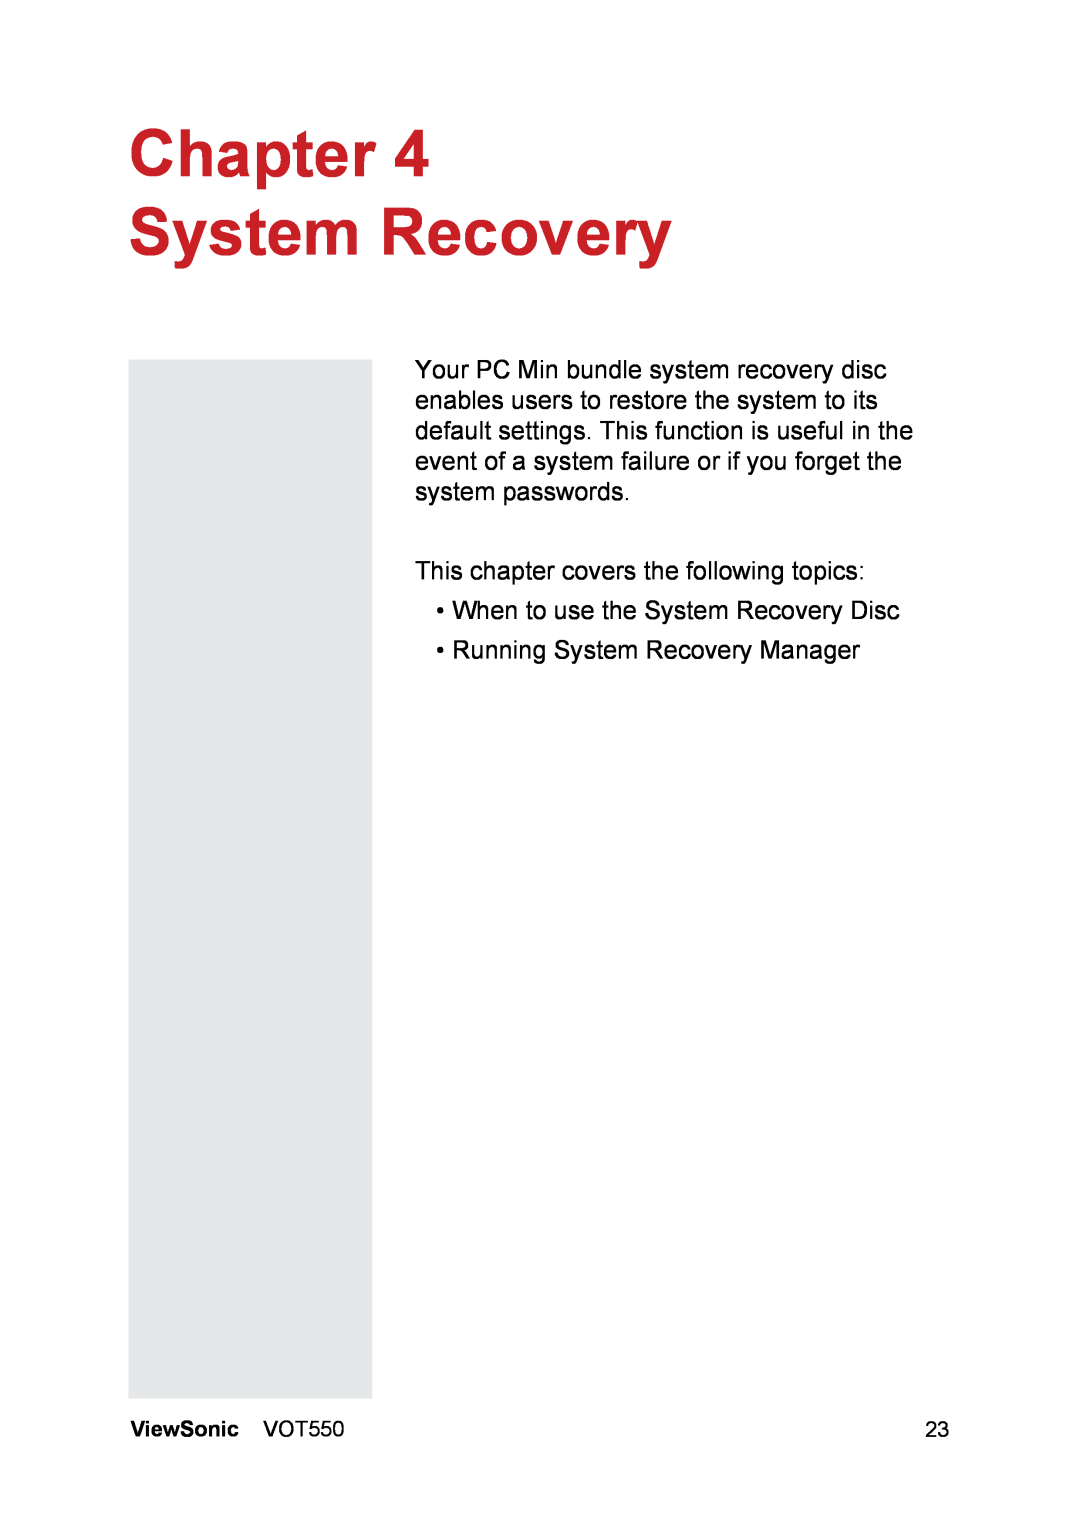 ViewSonic VOT550 Chapter System Recovery, Ths chapter covers the followng topcs, •When to use the System Recovery Dsc 